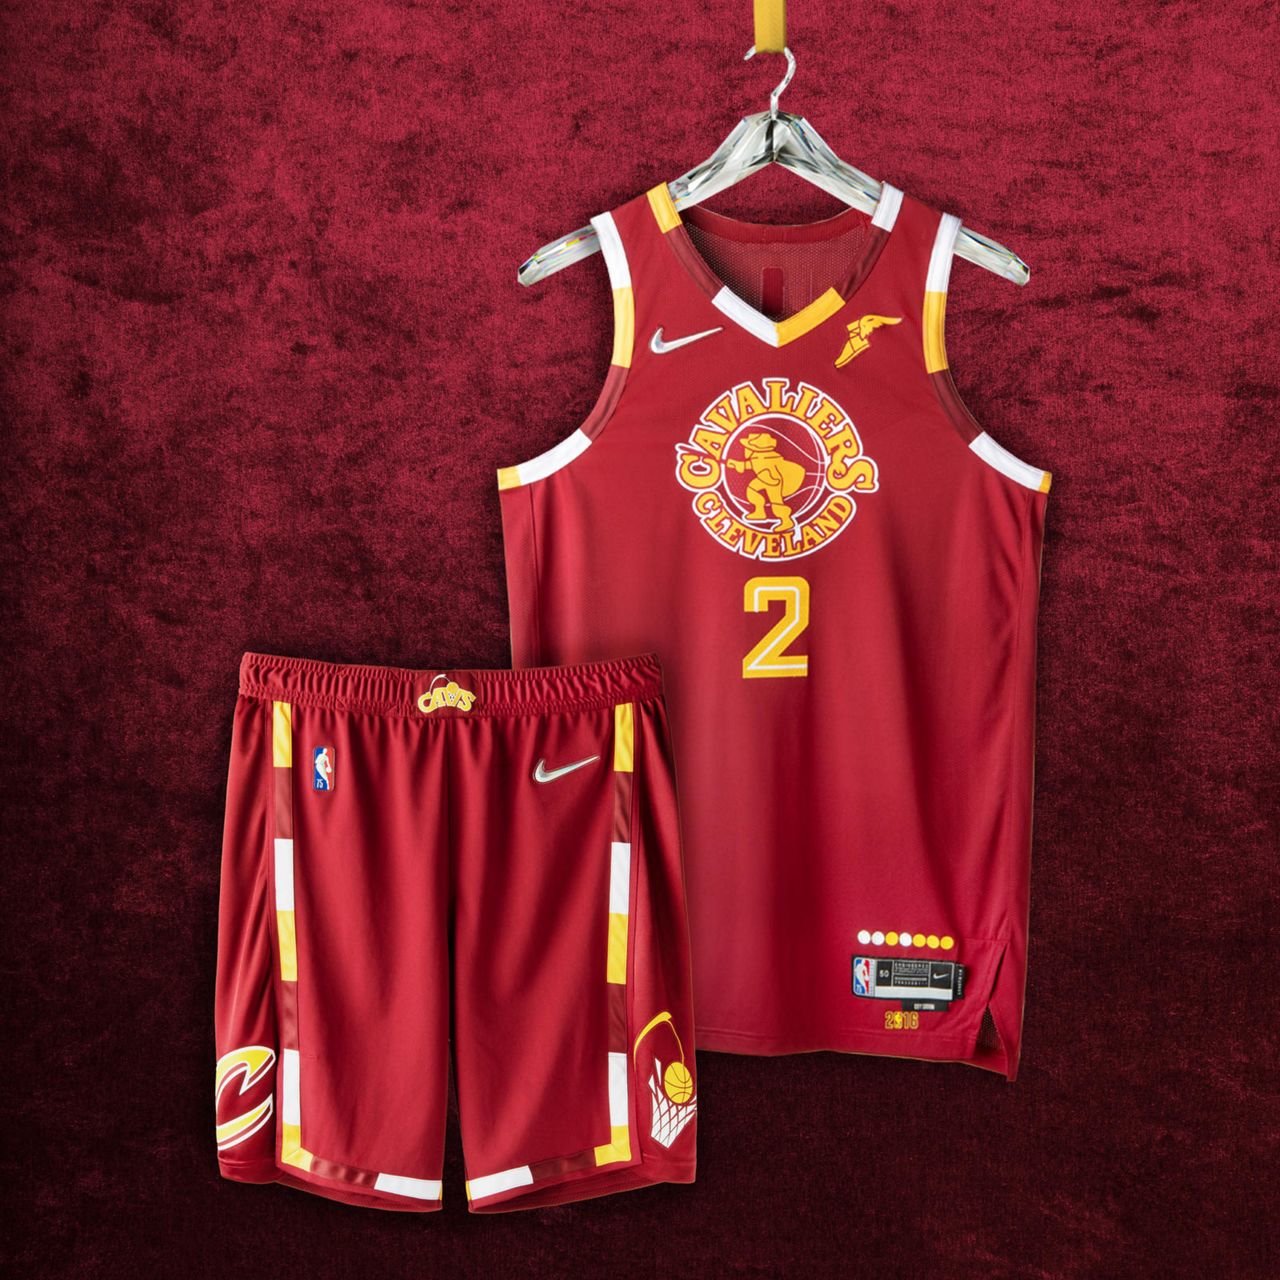 New Cavs uniform honors teams of the past